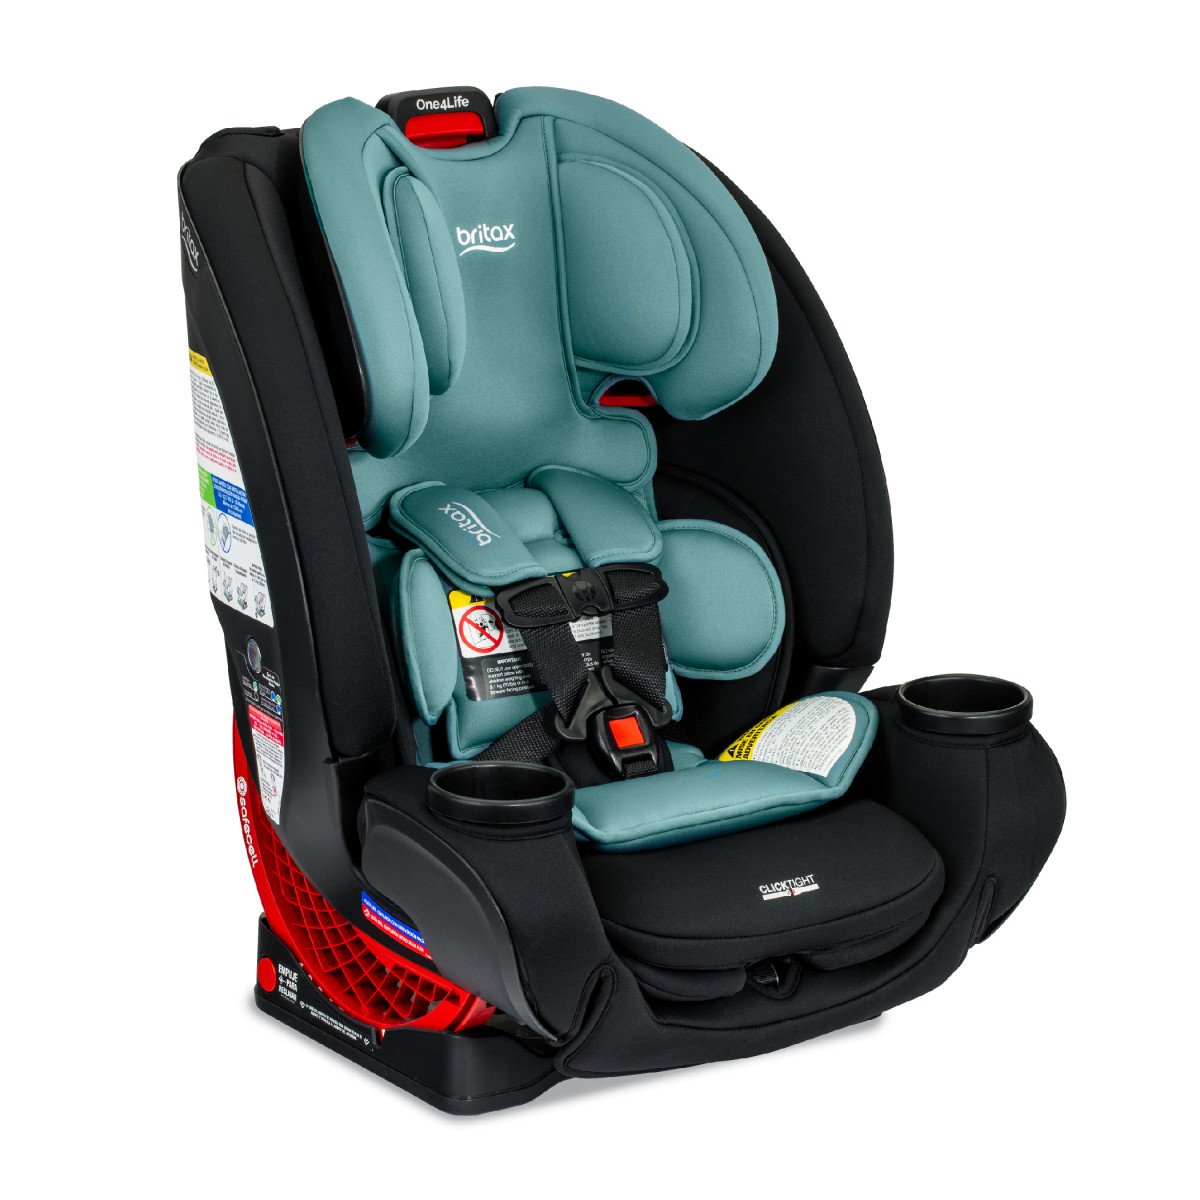 Jade Onyx Right Facing One4Life All-In-One Car Seat